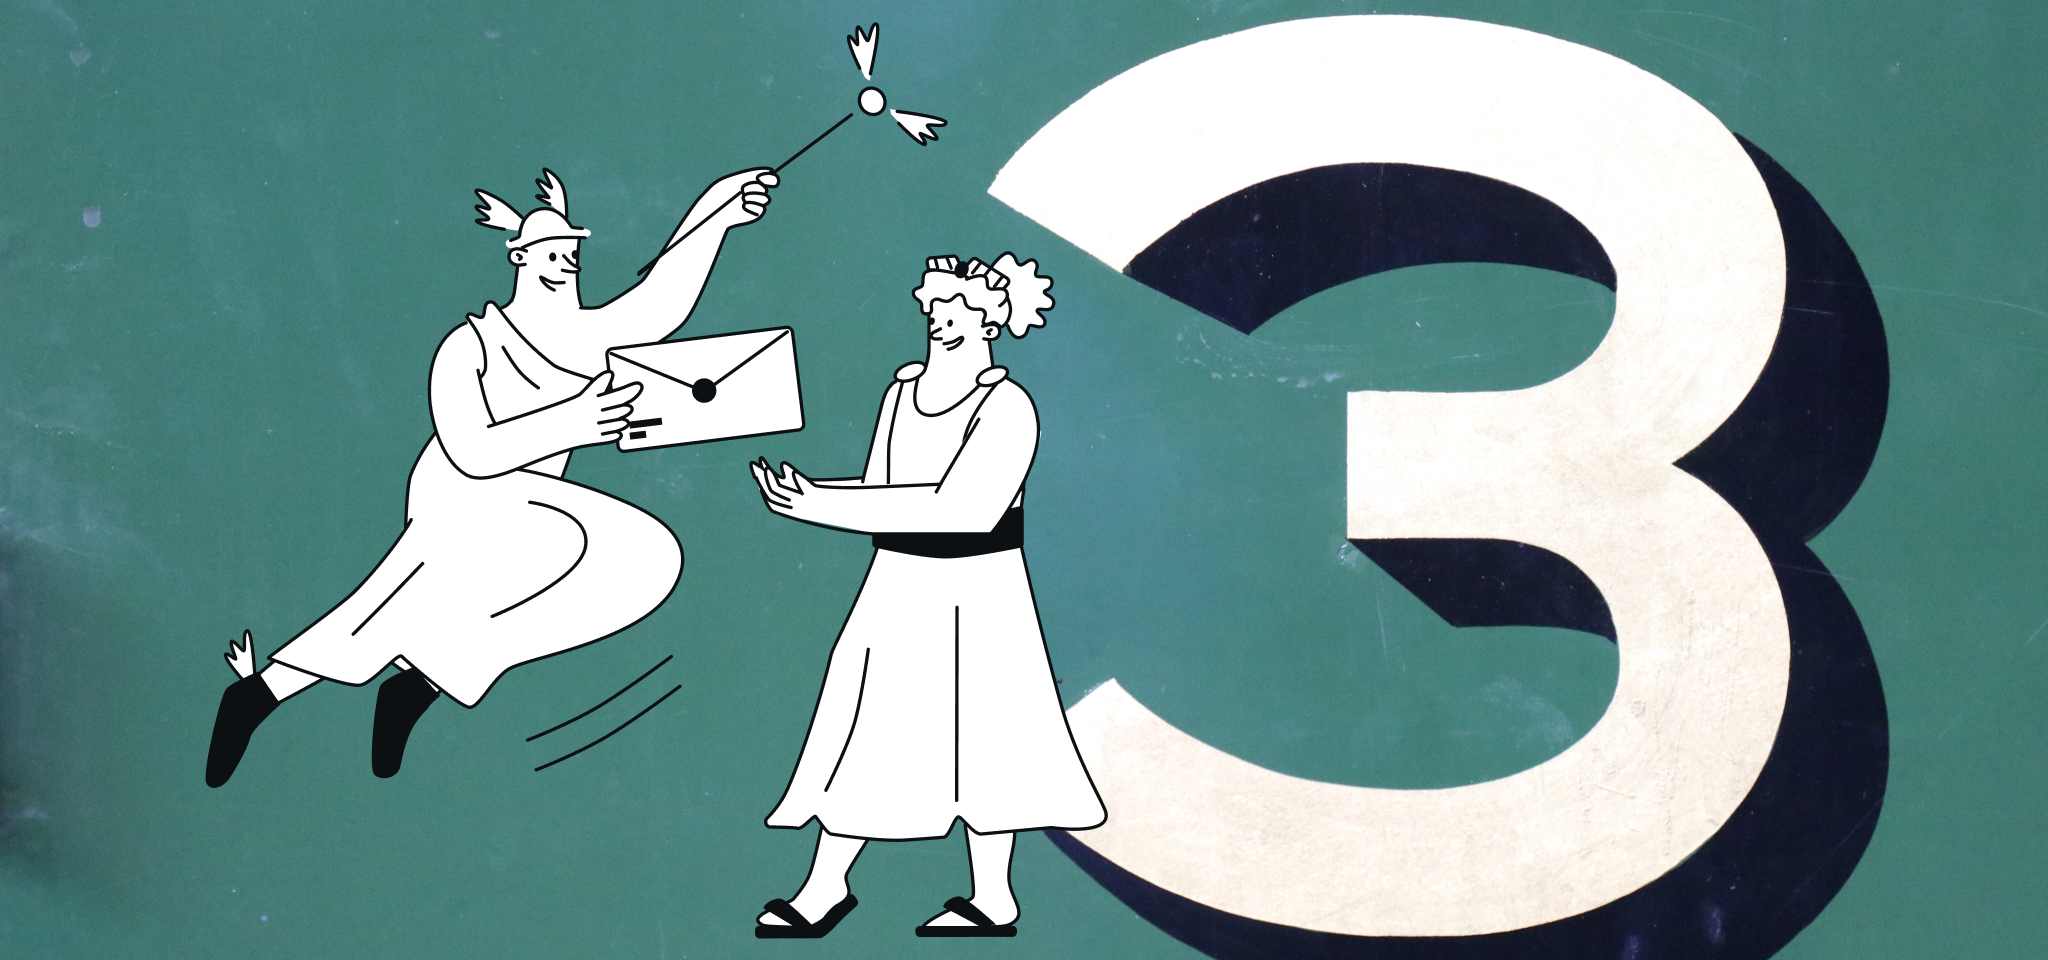 Hermes delivers an email to a goddess next to a big number three over a green background.